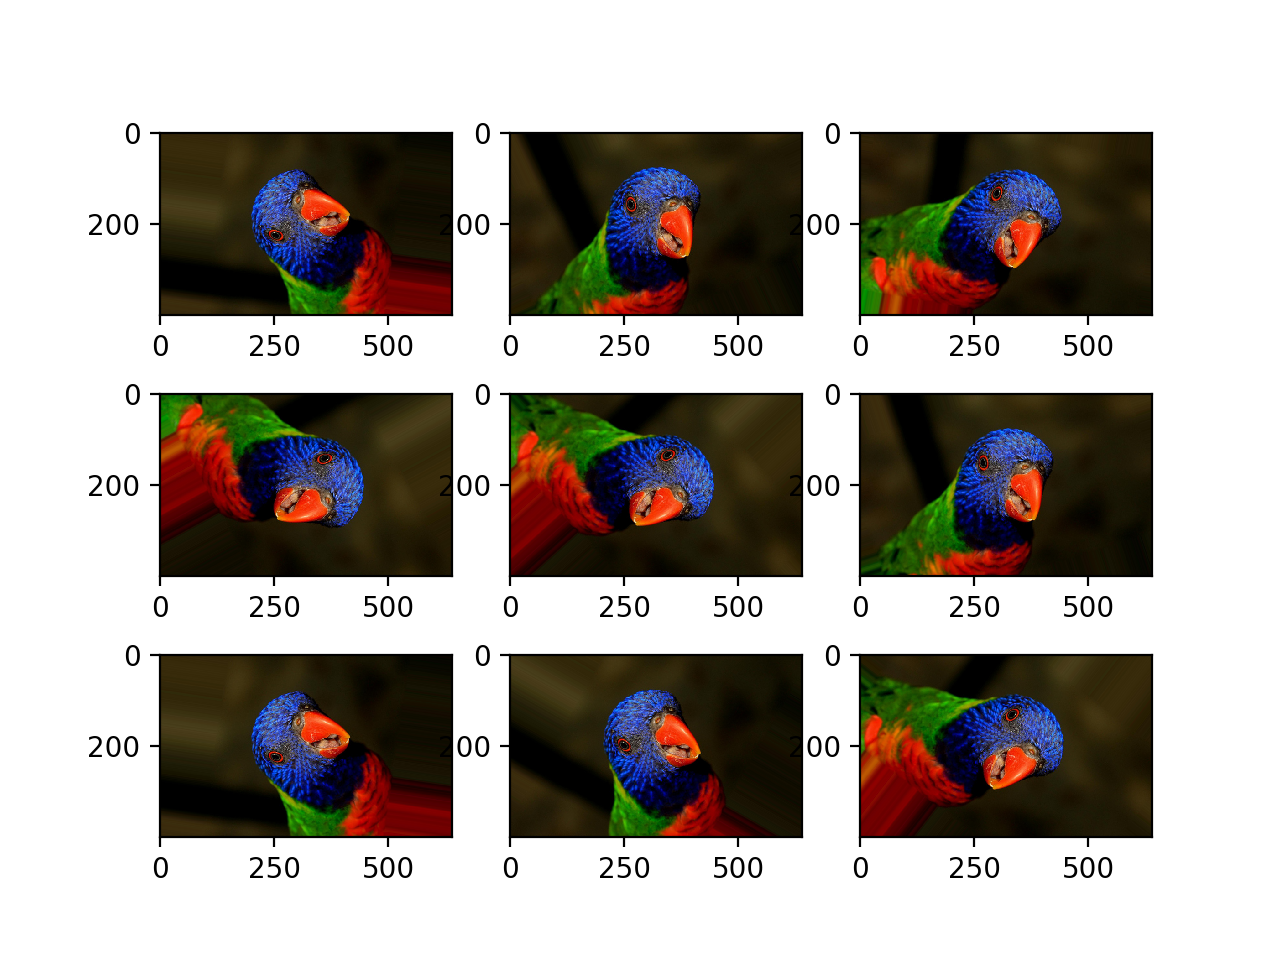 Plot of Images Generated With a Random Rotation Augmentation